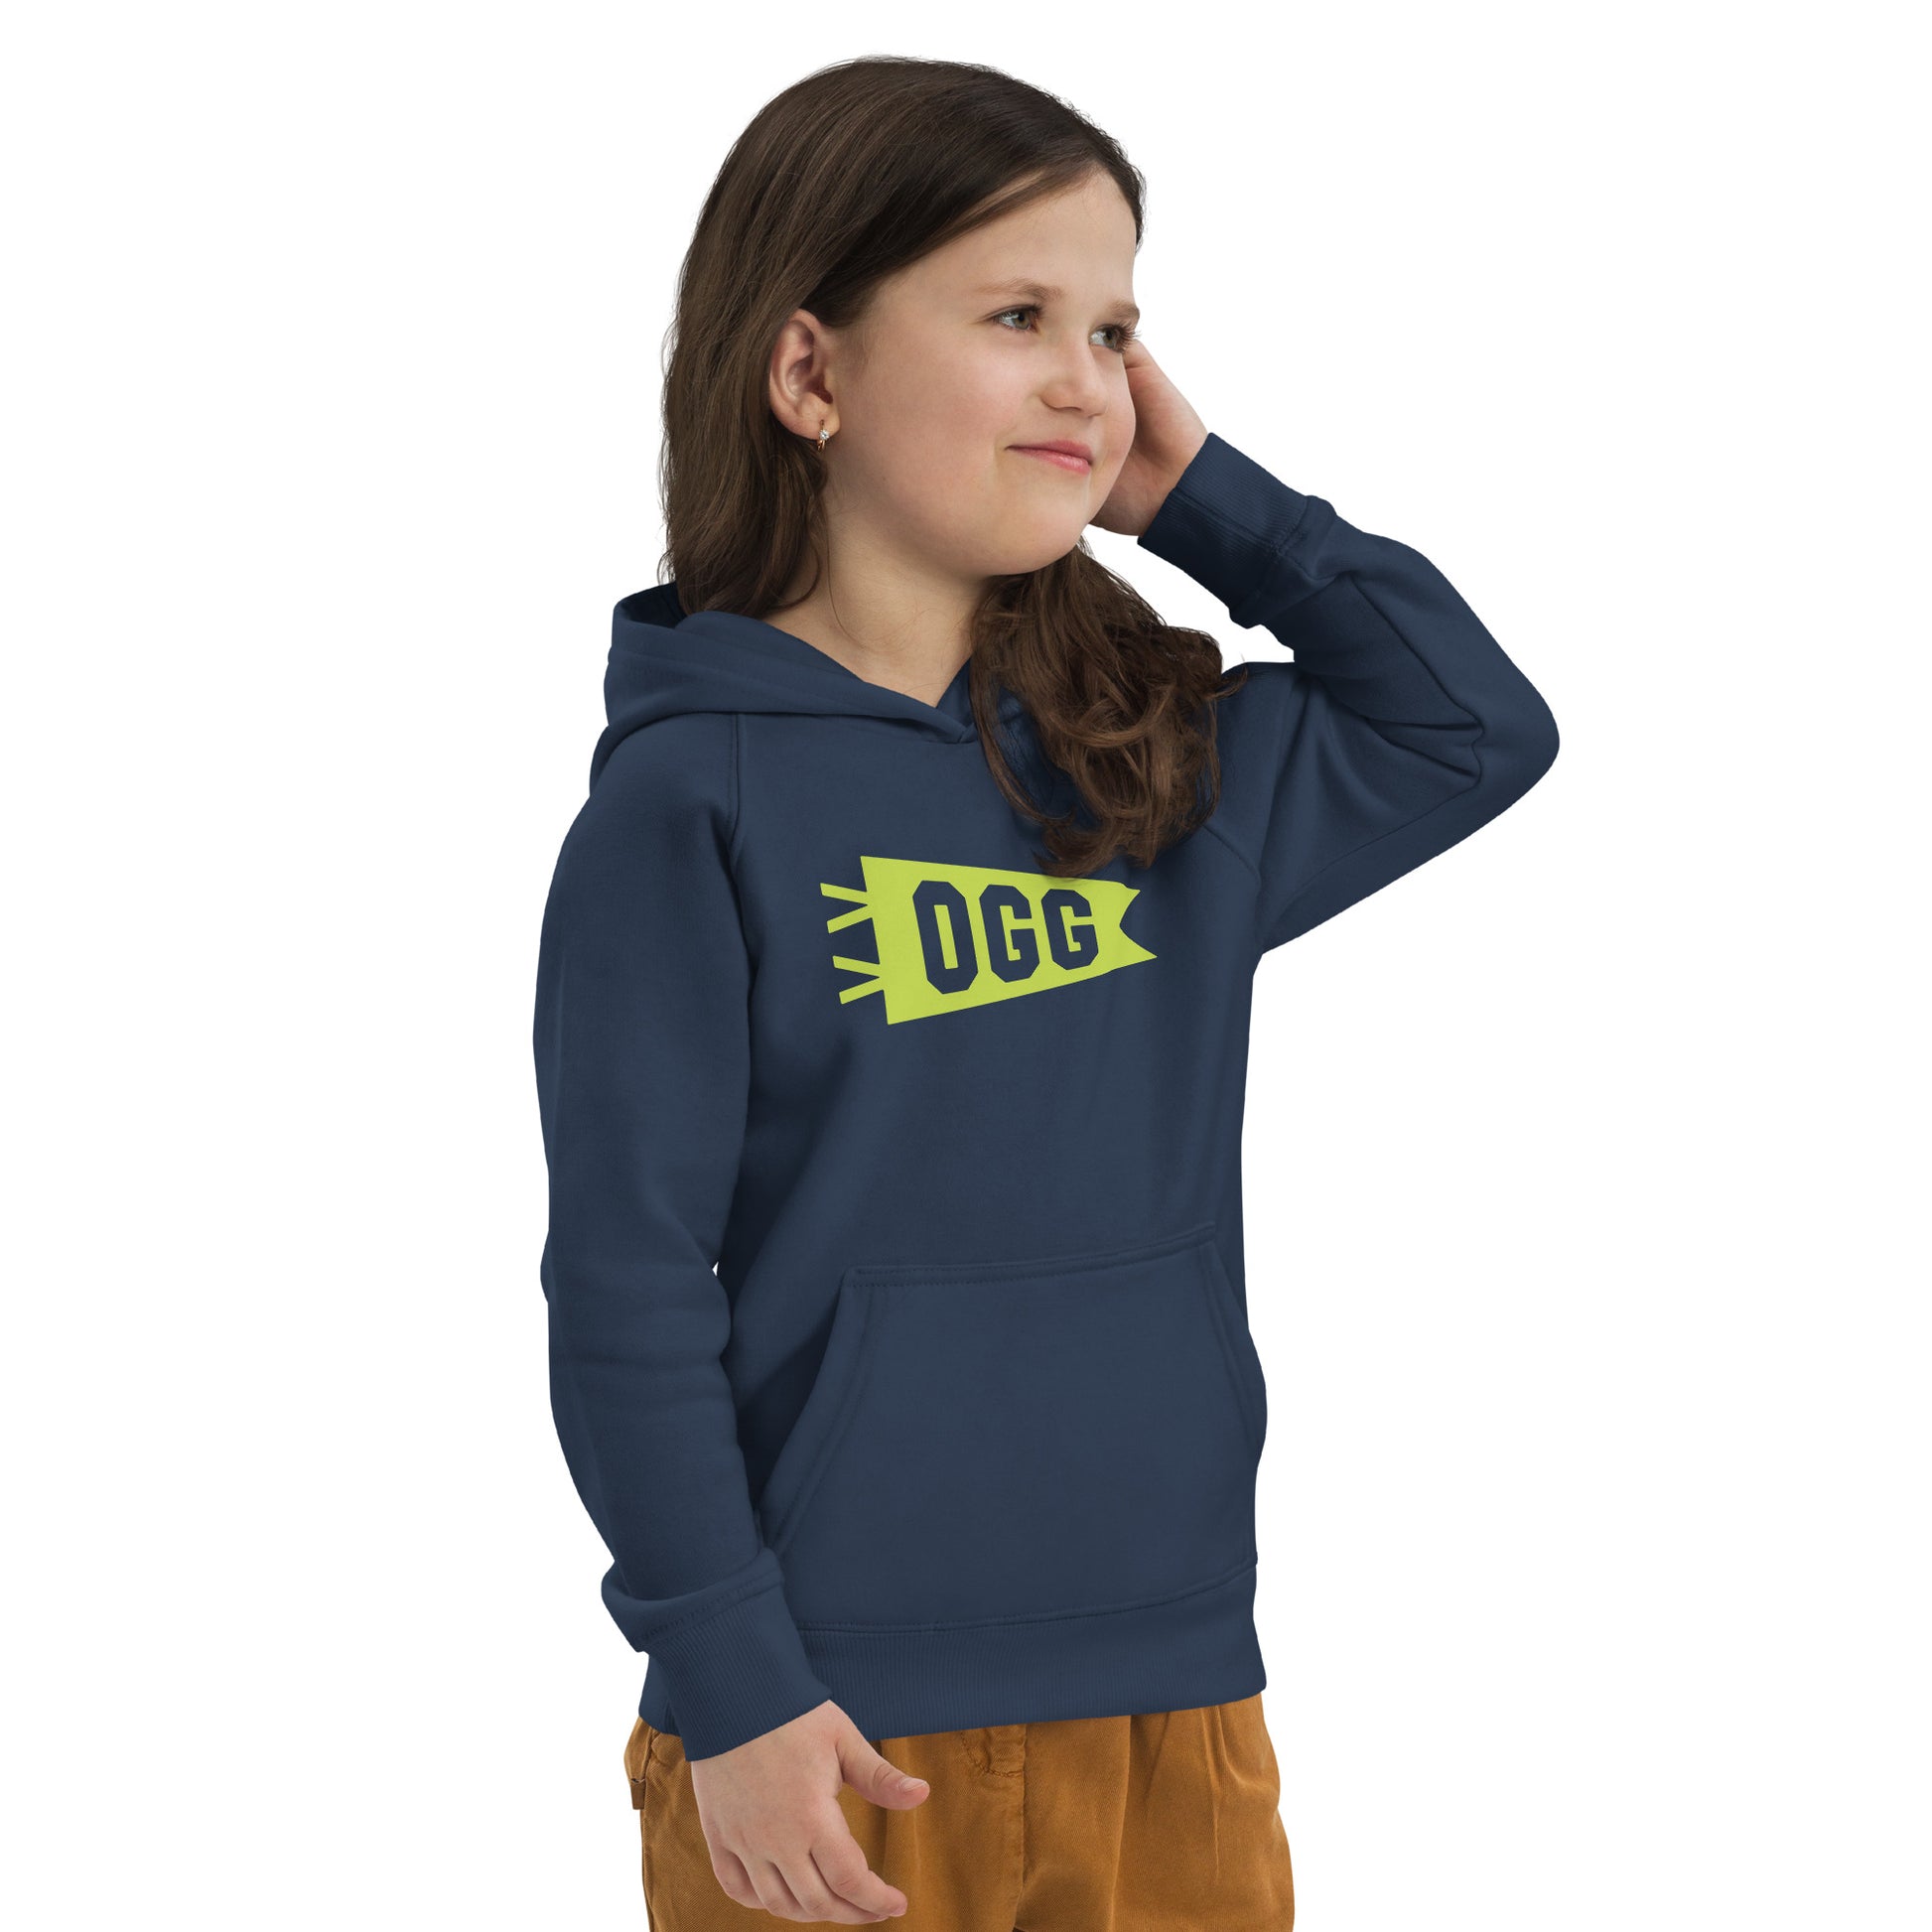 Kid's Sustainable Hoodie - Green Graphic • OGG Maui • YHM Designs - Image 06